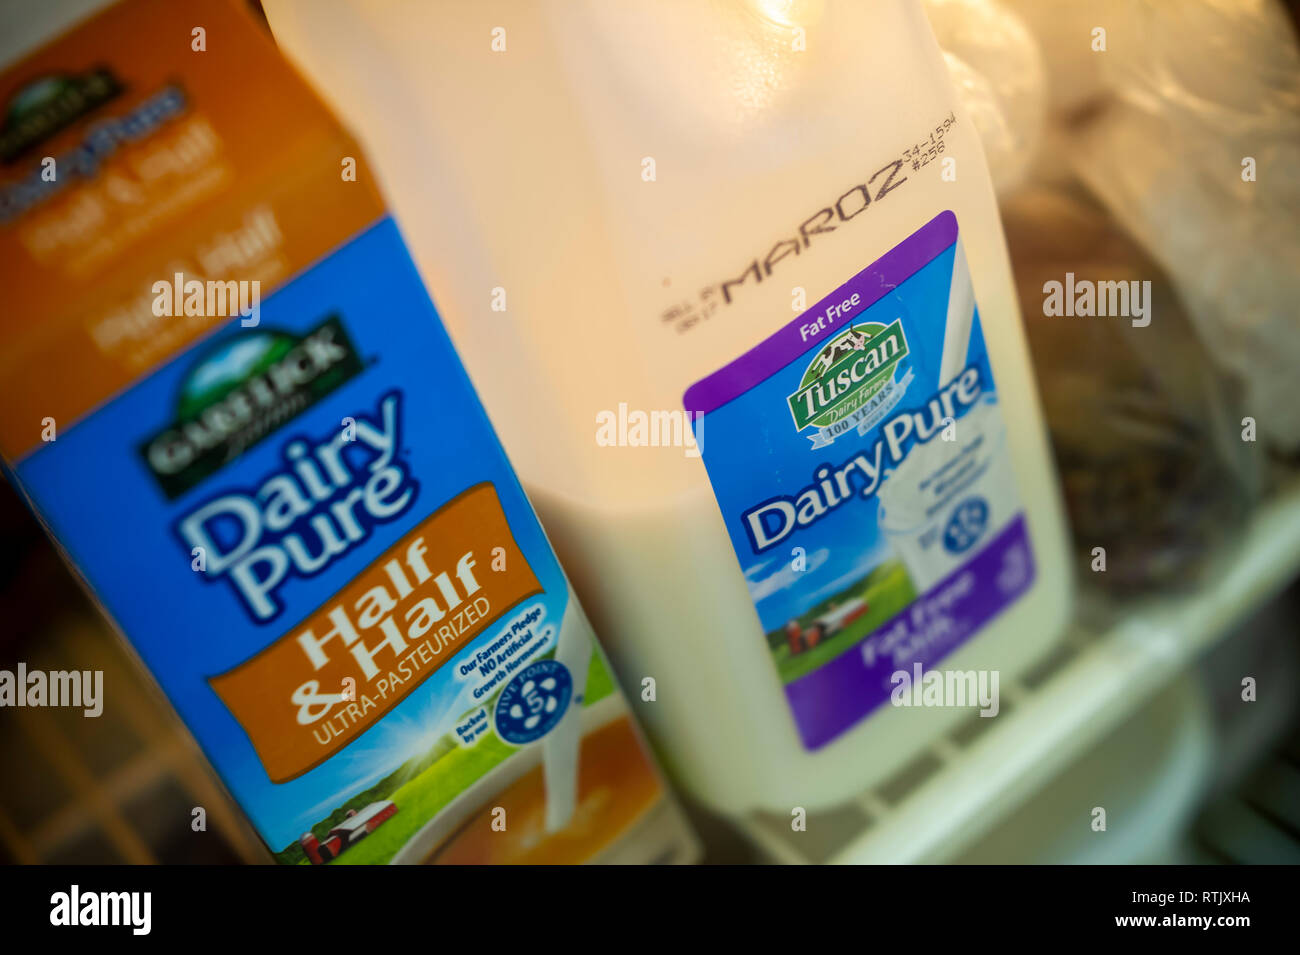 https://c8.alamy.com/comp/RTJXHA/containers-of-garelick-farms-and-tuscan-dairy-pure-half-half-and-milk-both-brands-of-dairy-producer-dean-foods-in-a-refrigerator-in-new-york-on-tuesday-february-26-2019-dean-foods-is-scheduled-to-report-earnings-on-wednesday-prior-to-the-bell-richard-b-levine-RTJXHA.jpg